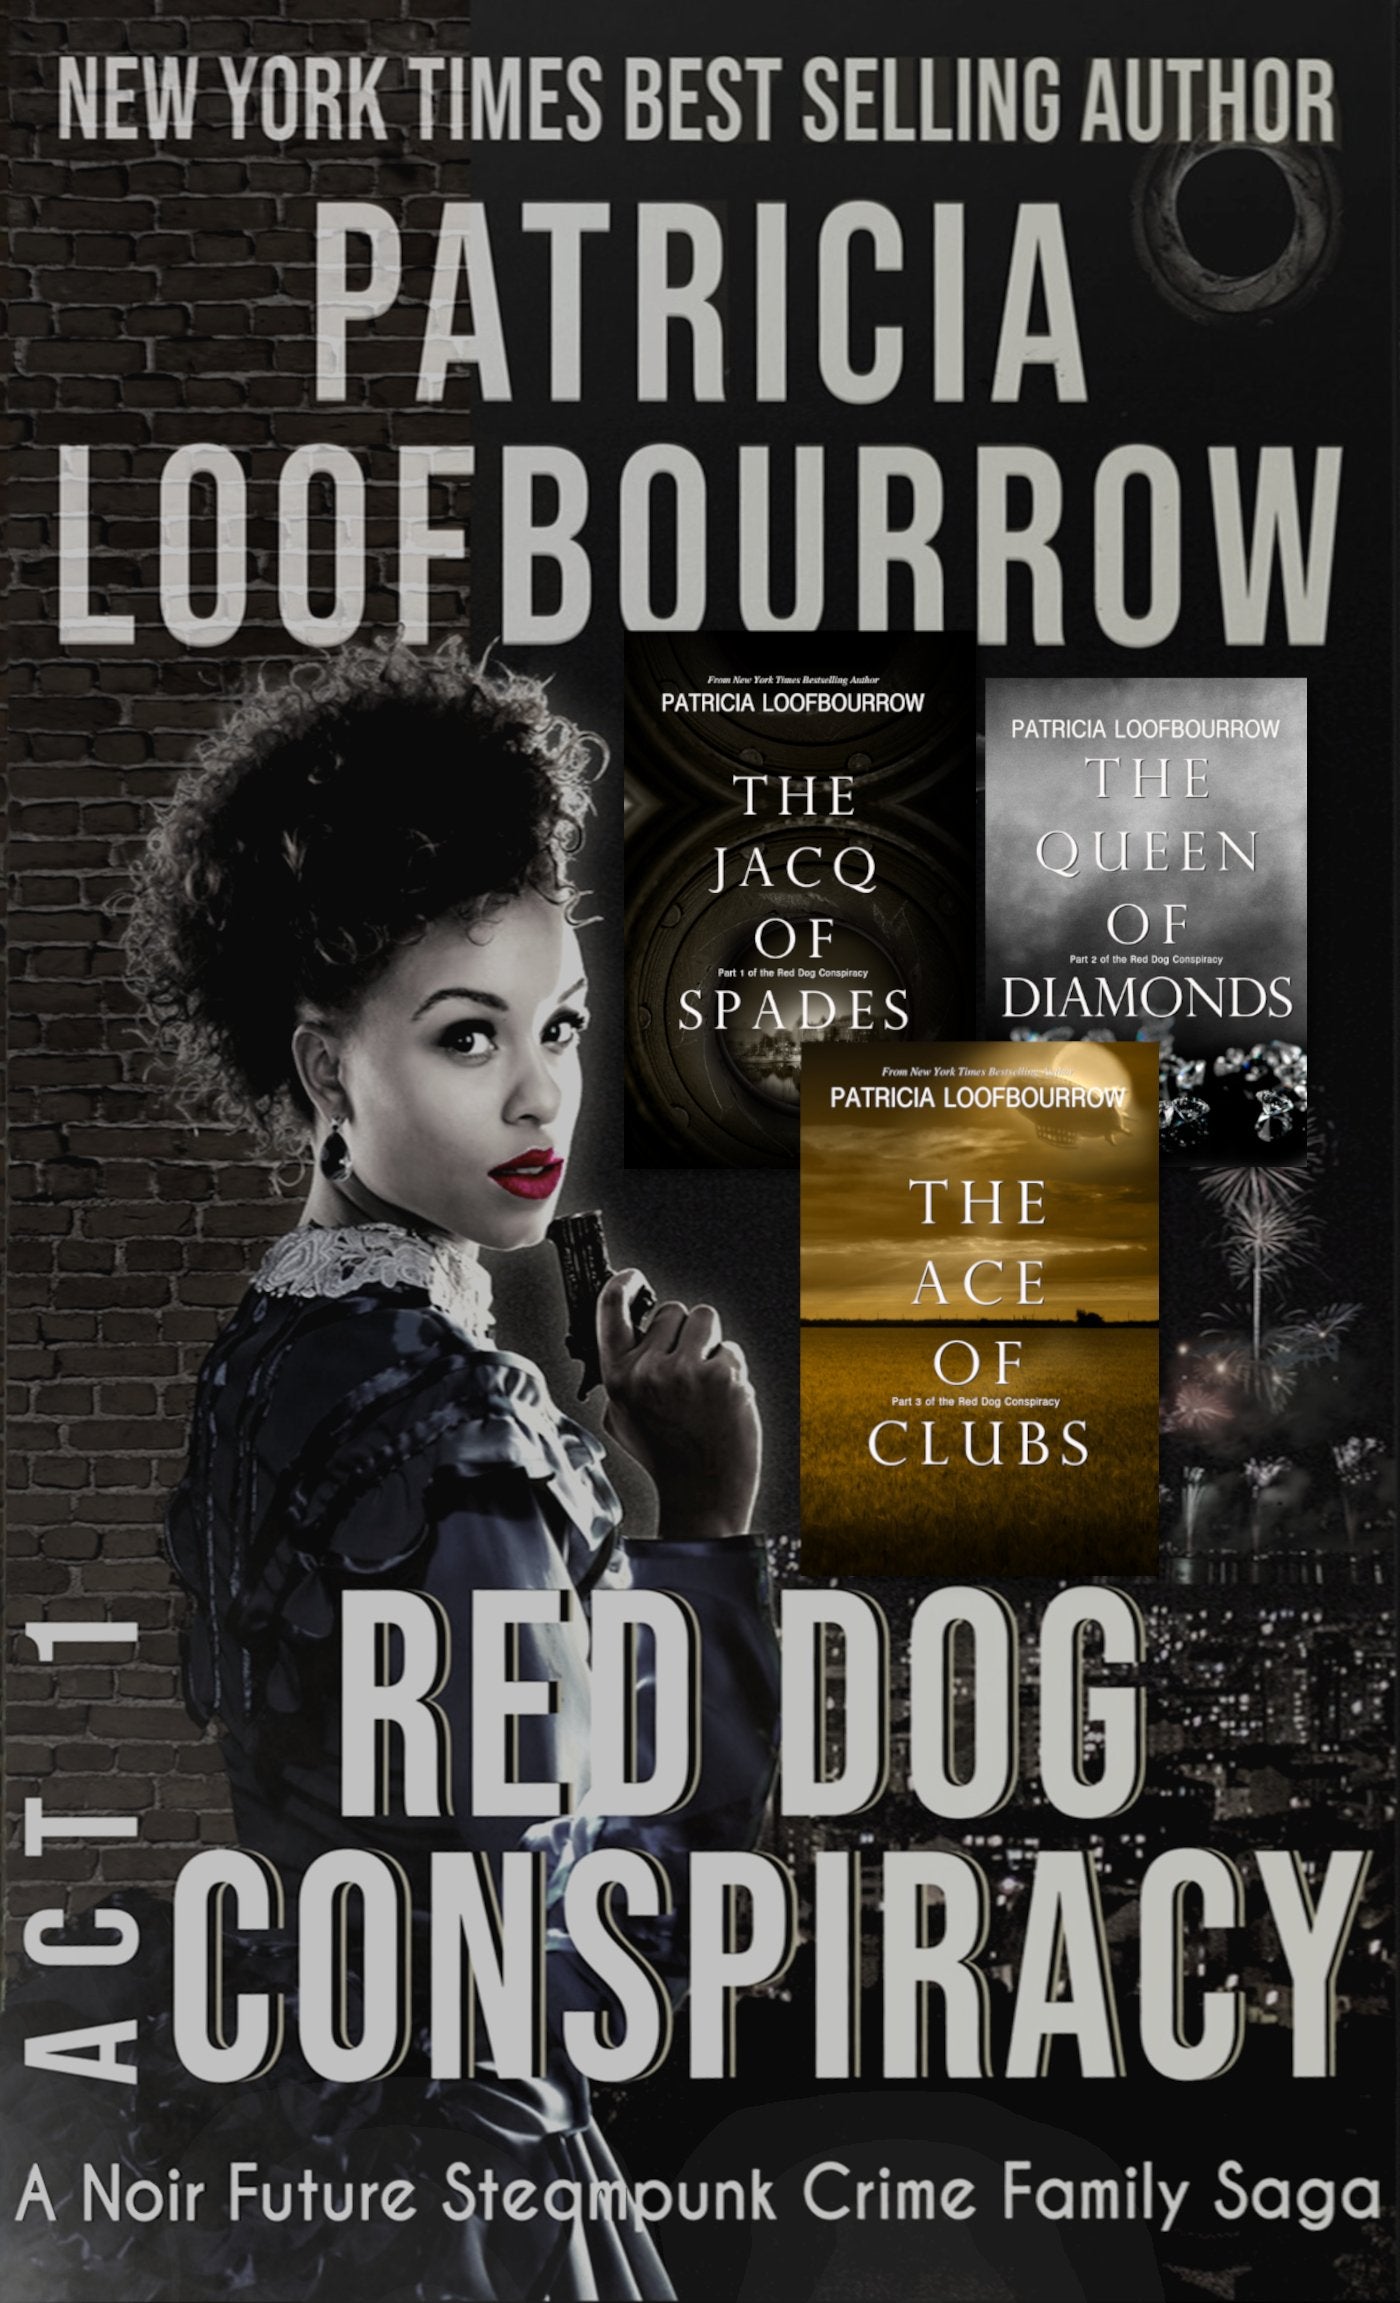 Red Dog Conspiracy Act 1 ebook - Patricia Loofbourrow